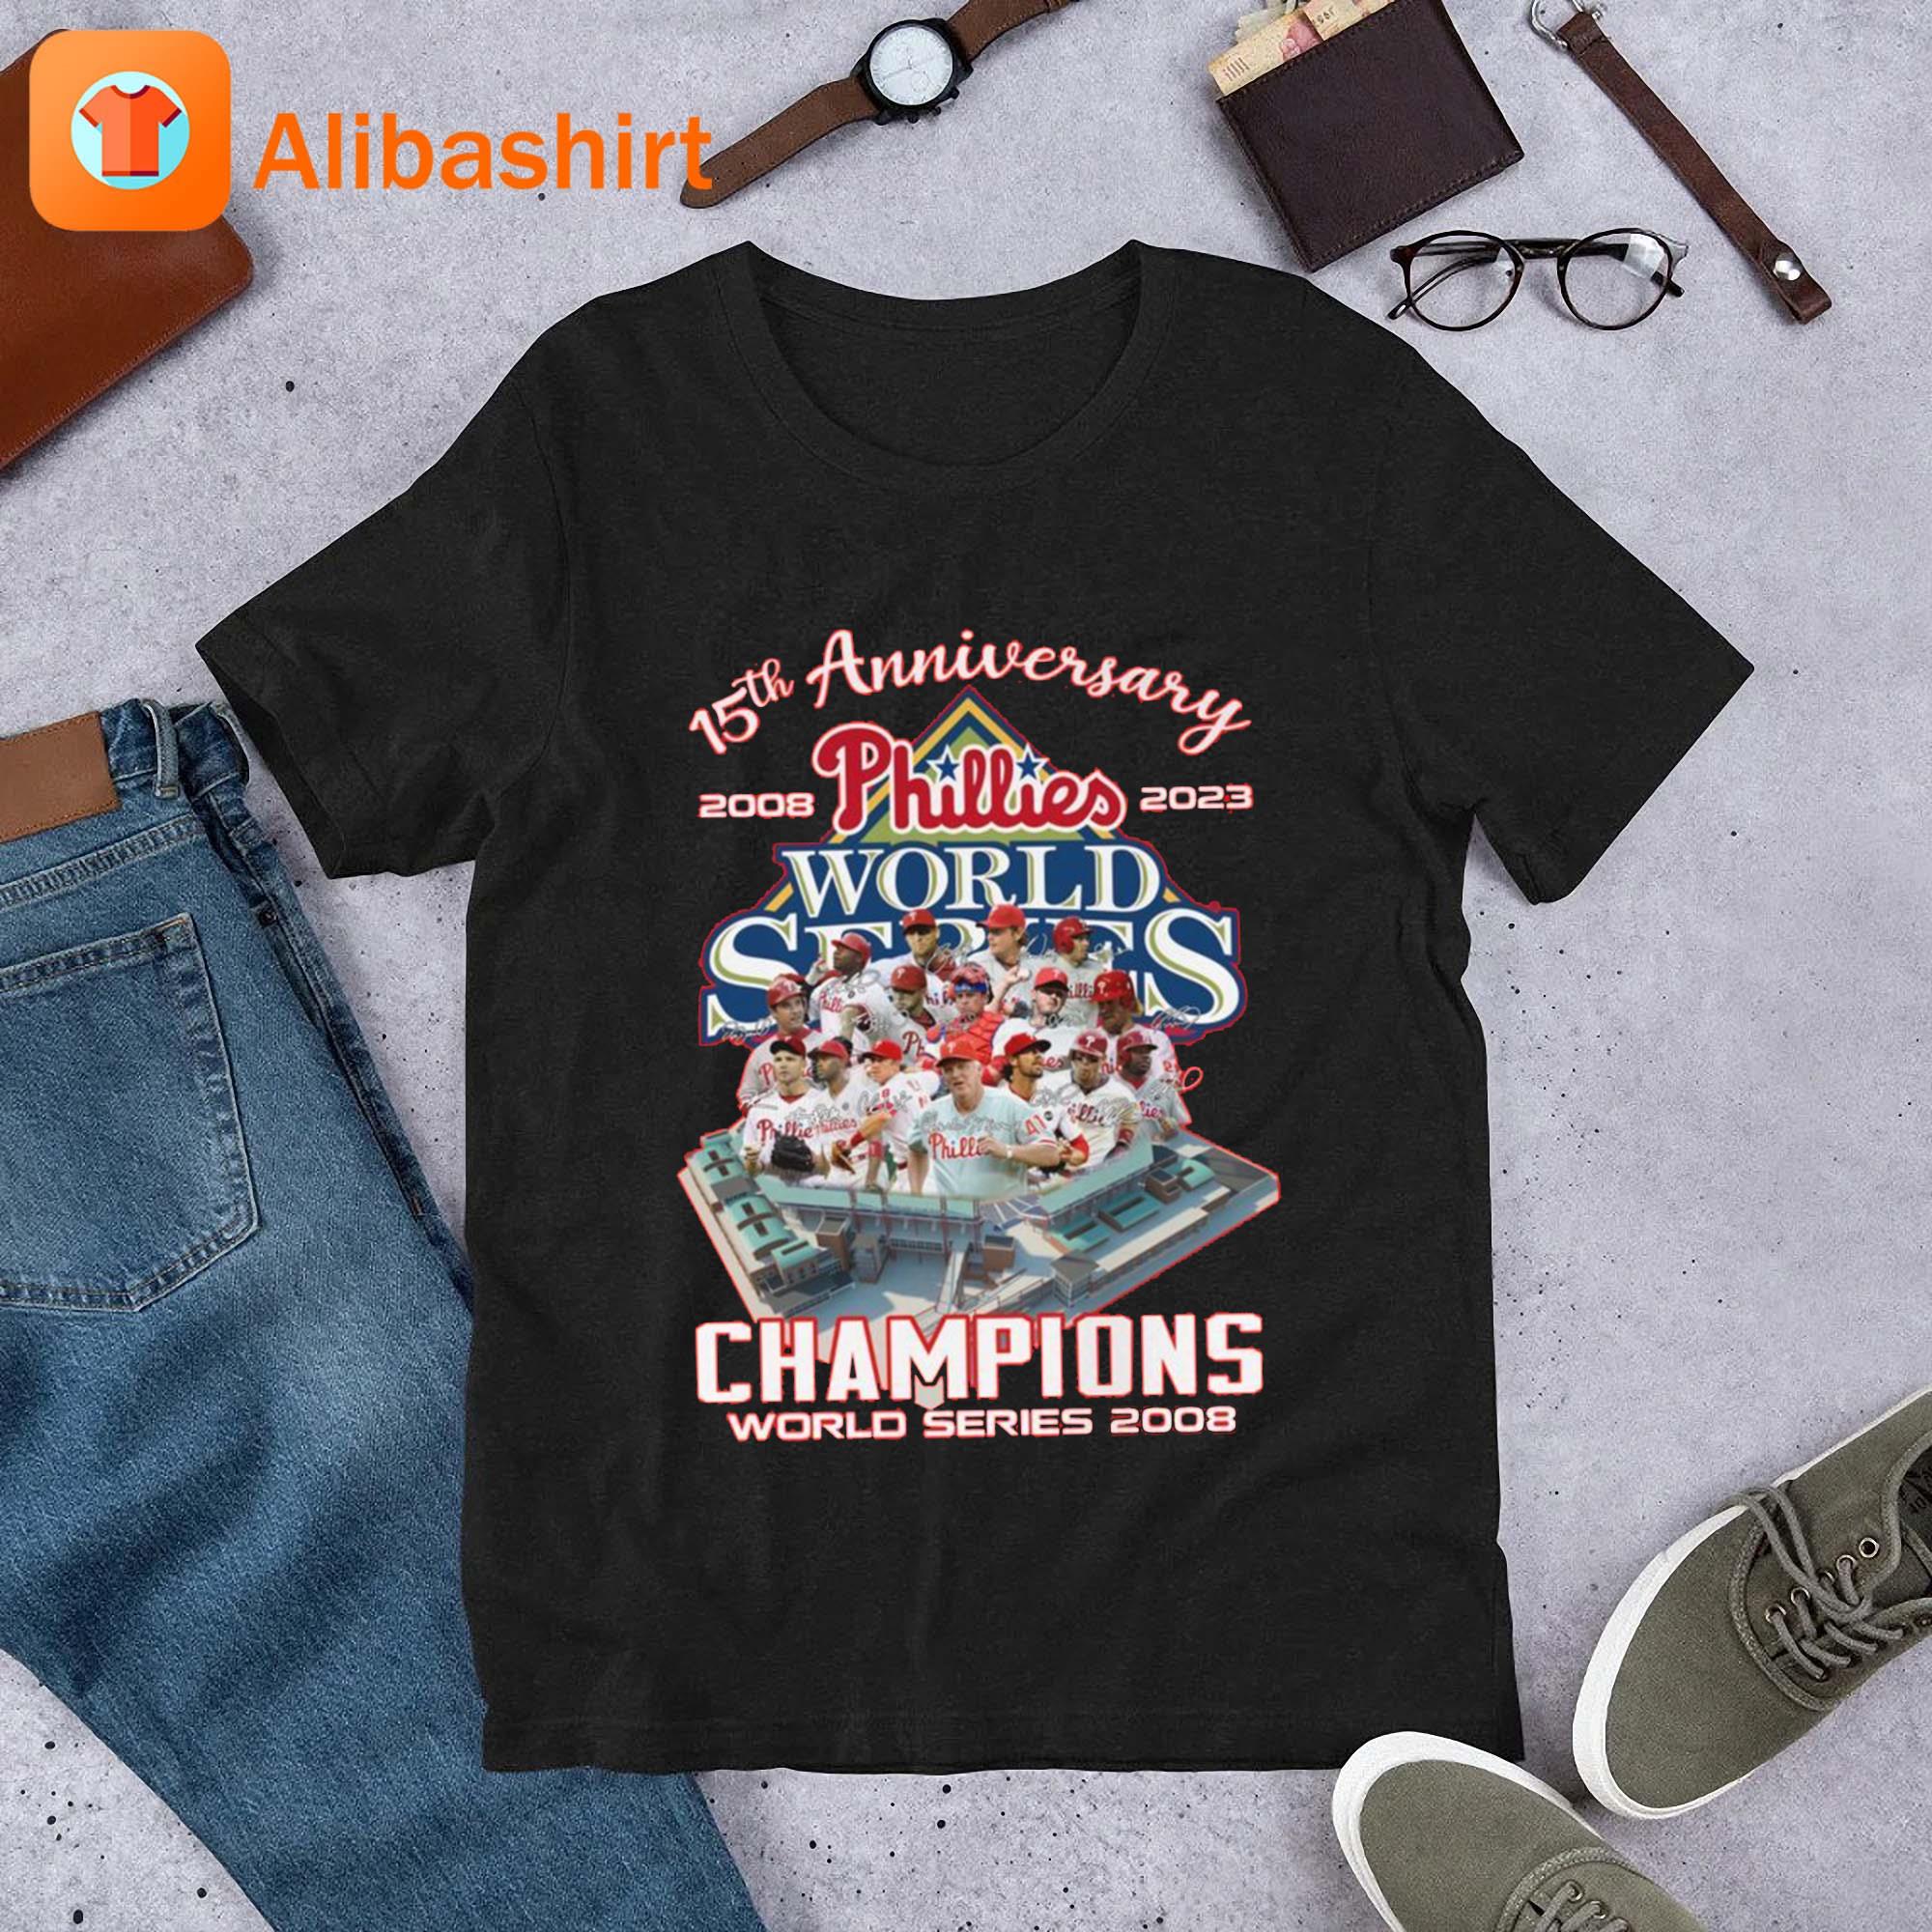 Official 15th Anniversary 2008 – 2023 Phillies Champions World Series 2008 Shirt